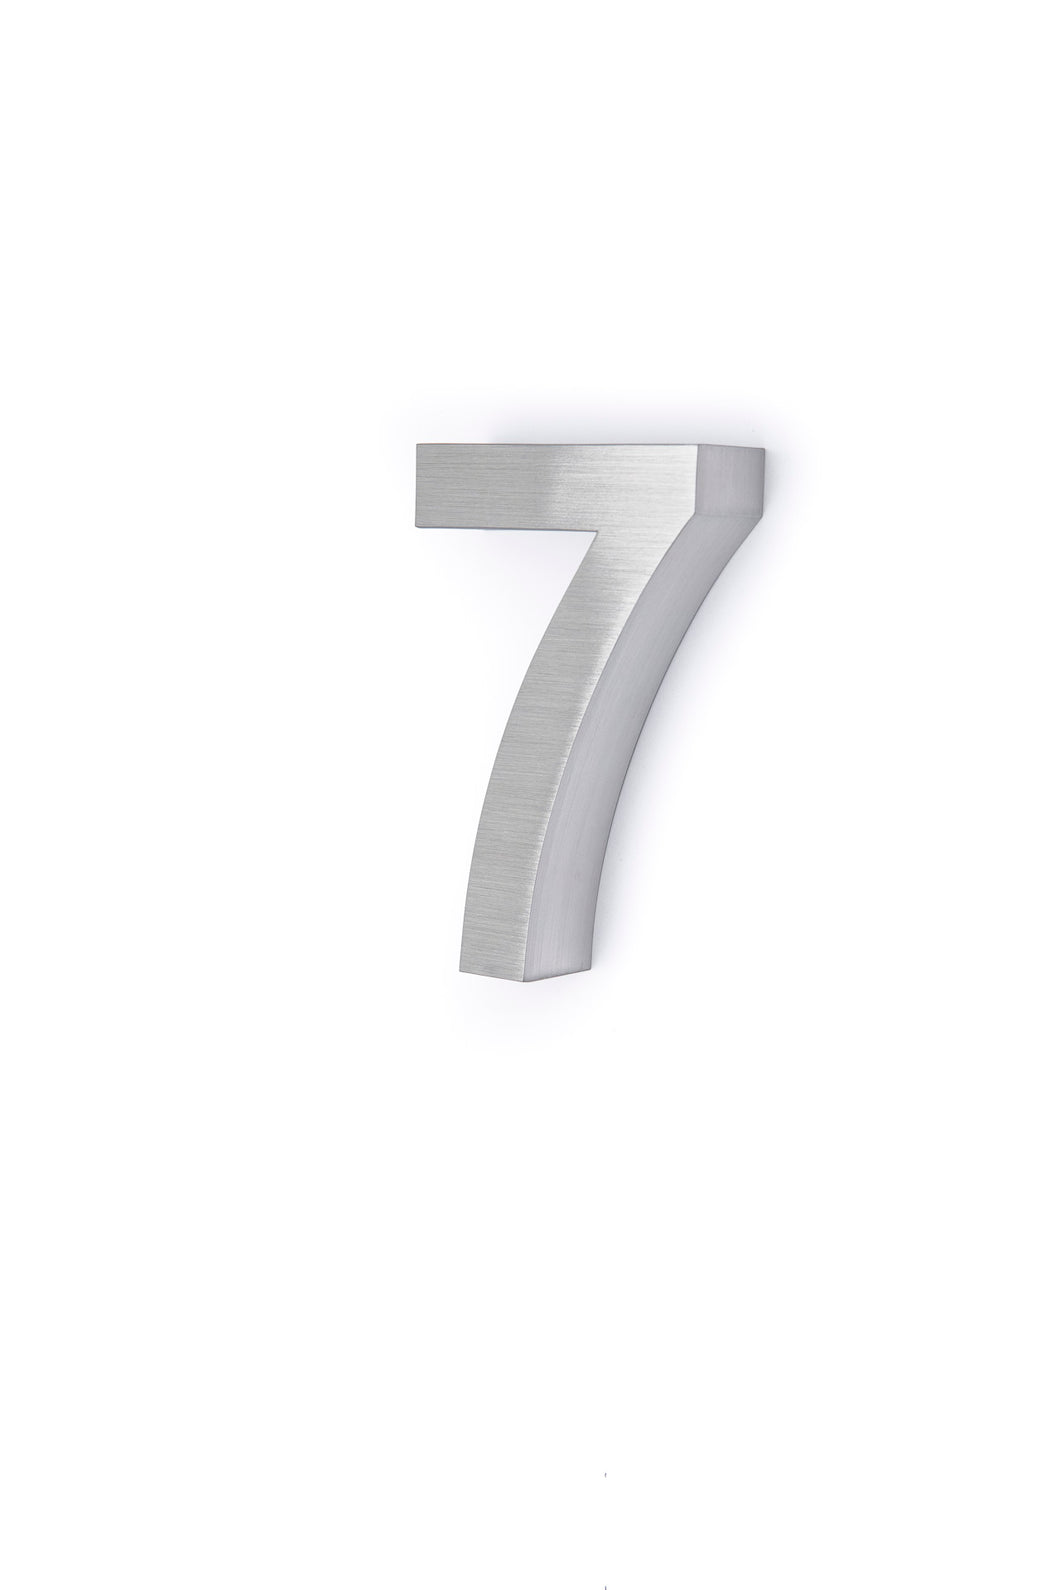 6 Inch 3D Stainless Steel House Number Seven